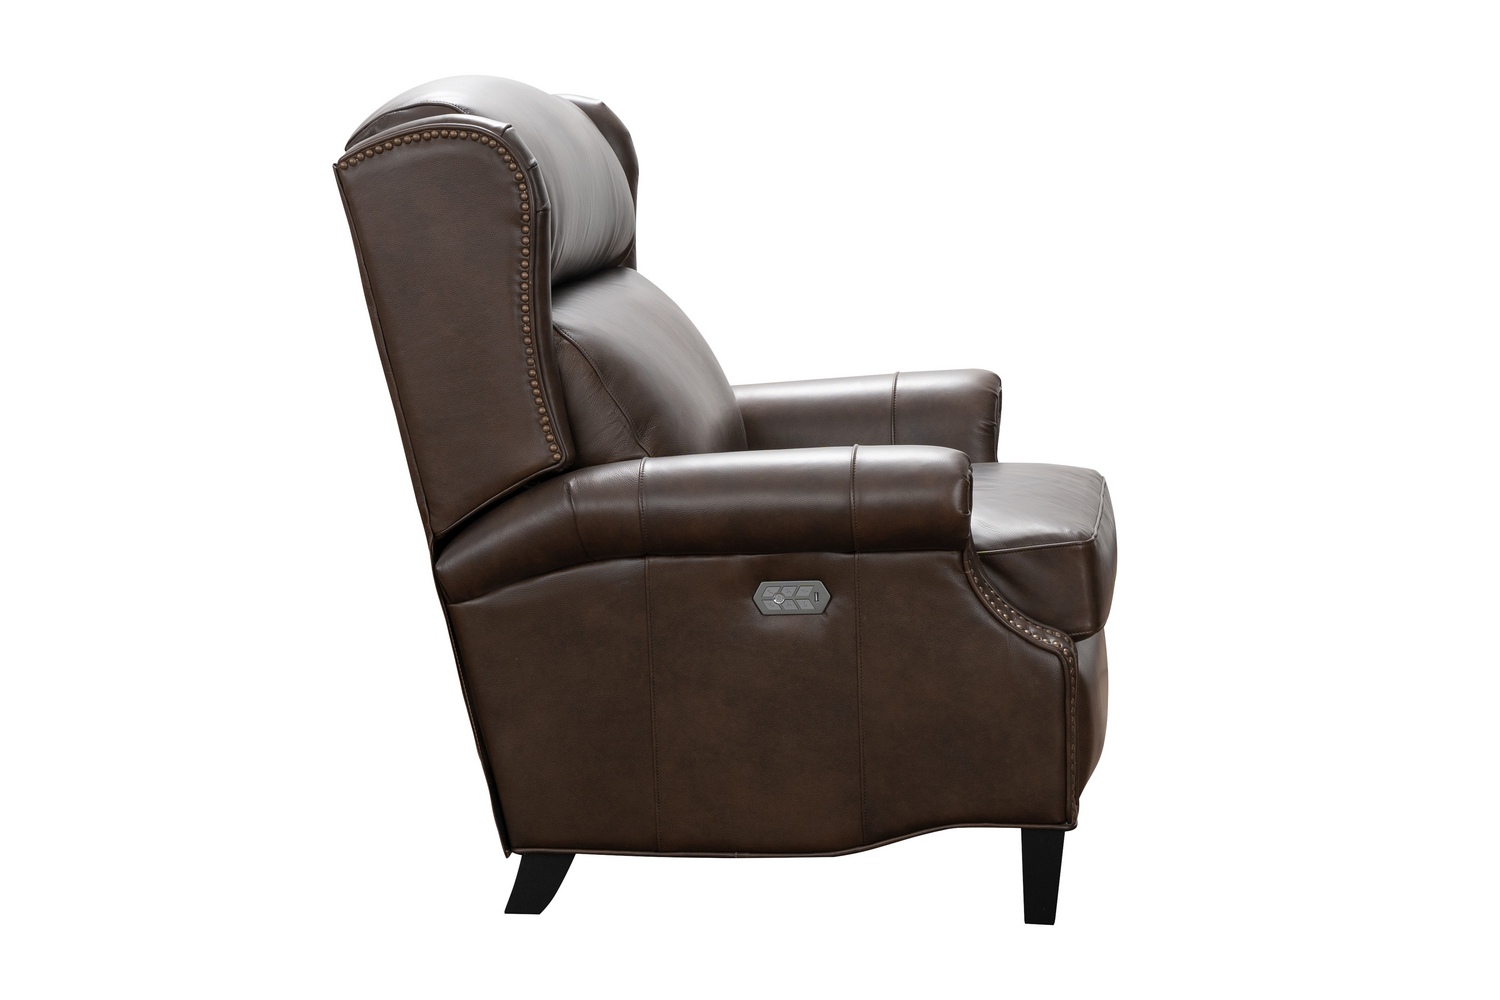 Barcalounger Philadelphia Power Recliner Chair with Power Head Rest and Lumbar - Ashford Walnut/All Leather